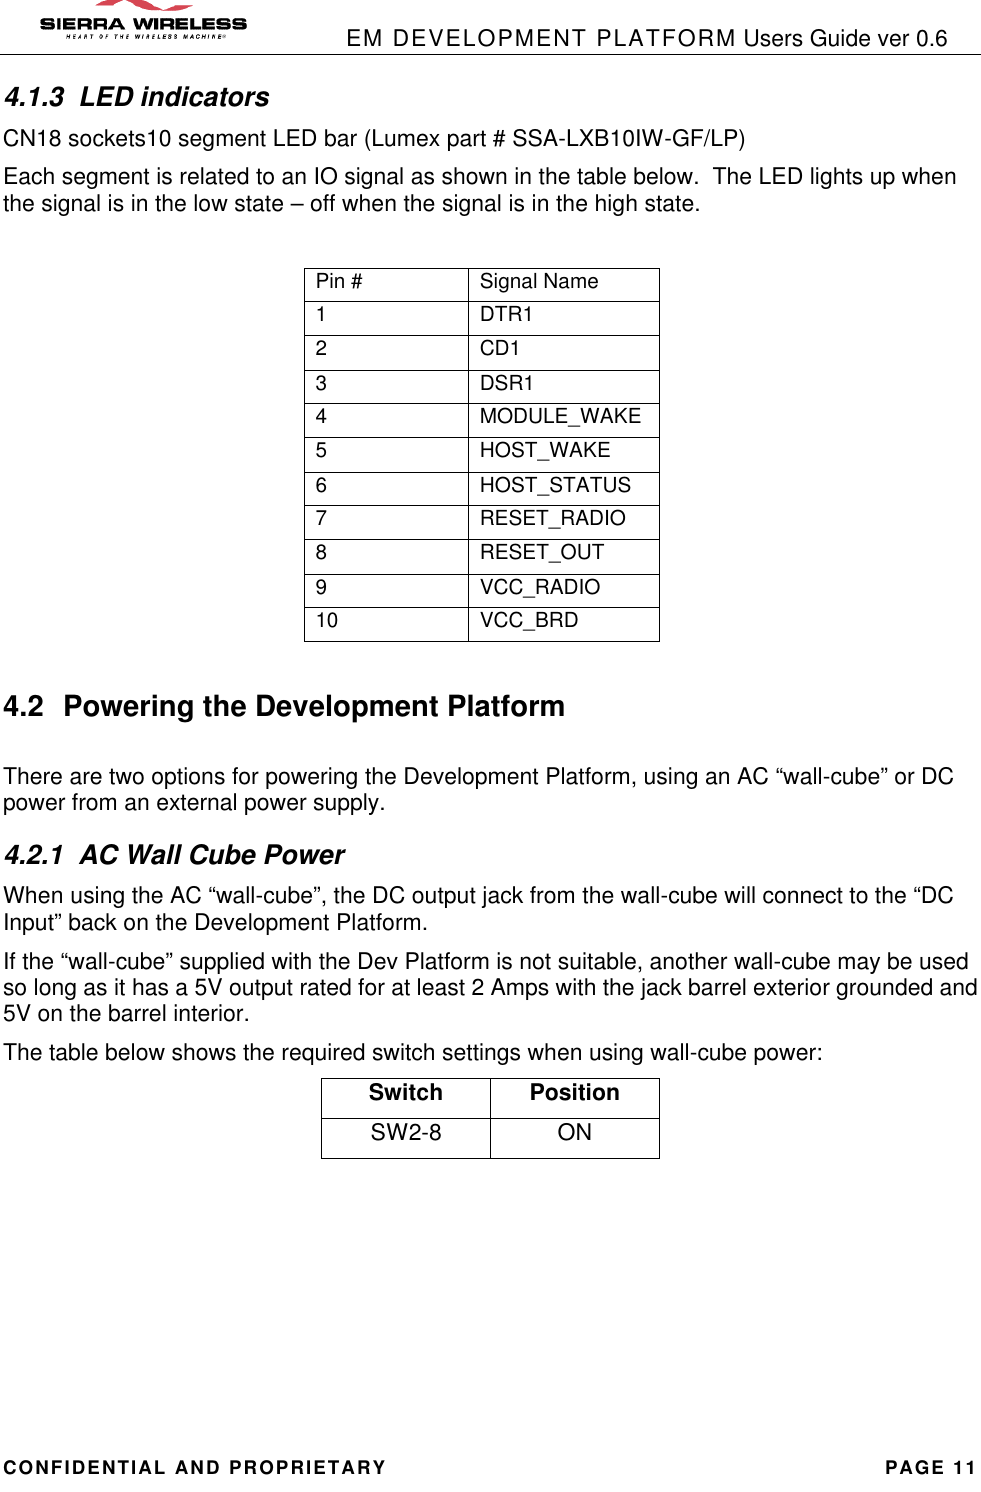            EM DEVELOPMENT PLATFORM Users Guide ver 0.6 CONFIDENTIAL AND PROPRIETARY PAGE 11 4.1.3 LED indicators CN18 sockets10 segment LED bar (Lumex part # SSA-LXB10IW-GF/LP) Each segment is related to an IO signal as shown in the table below.  The LED lights up when the signal is in the low state – off when the signal is in the high state.  Pin # Signal Name 1 DTR1 2 CD1 3 DSR1 4 MODULE_WAKE 5 HOST_WAKE 6 HOST_STATUS 7 RESET_RADIO 8 RESET_OUT 9 VCC_RADIO 10 VCC_BRD  4.2 Powering the Development Platform  There are two options for powering the Development Platform, using an AC “wall-cube” or DC power from an external power supply. 4.2.1 AC Wall Cube Power When using the AC “wall-cube”, the DC output jack from the wall-cube will connect to the “DC Input” back on the Development Platform.   If the “wall-cube” supplied with the Dev Platform is not suitable, another wall-cube may be used so long as it has a 5V output rated for at least 2 Amps with the jack barrel exterior grounded and 5V on the barrel interior. The table below shows the required switch settings when using wall-cube power: Switch Position SW2-8 ON        